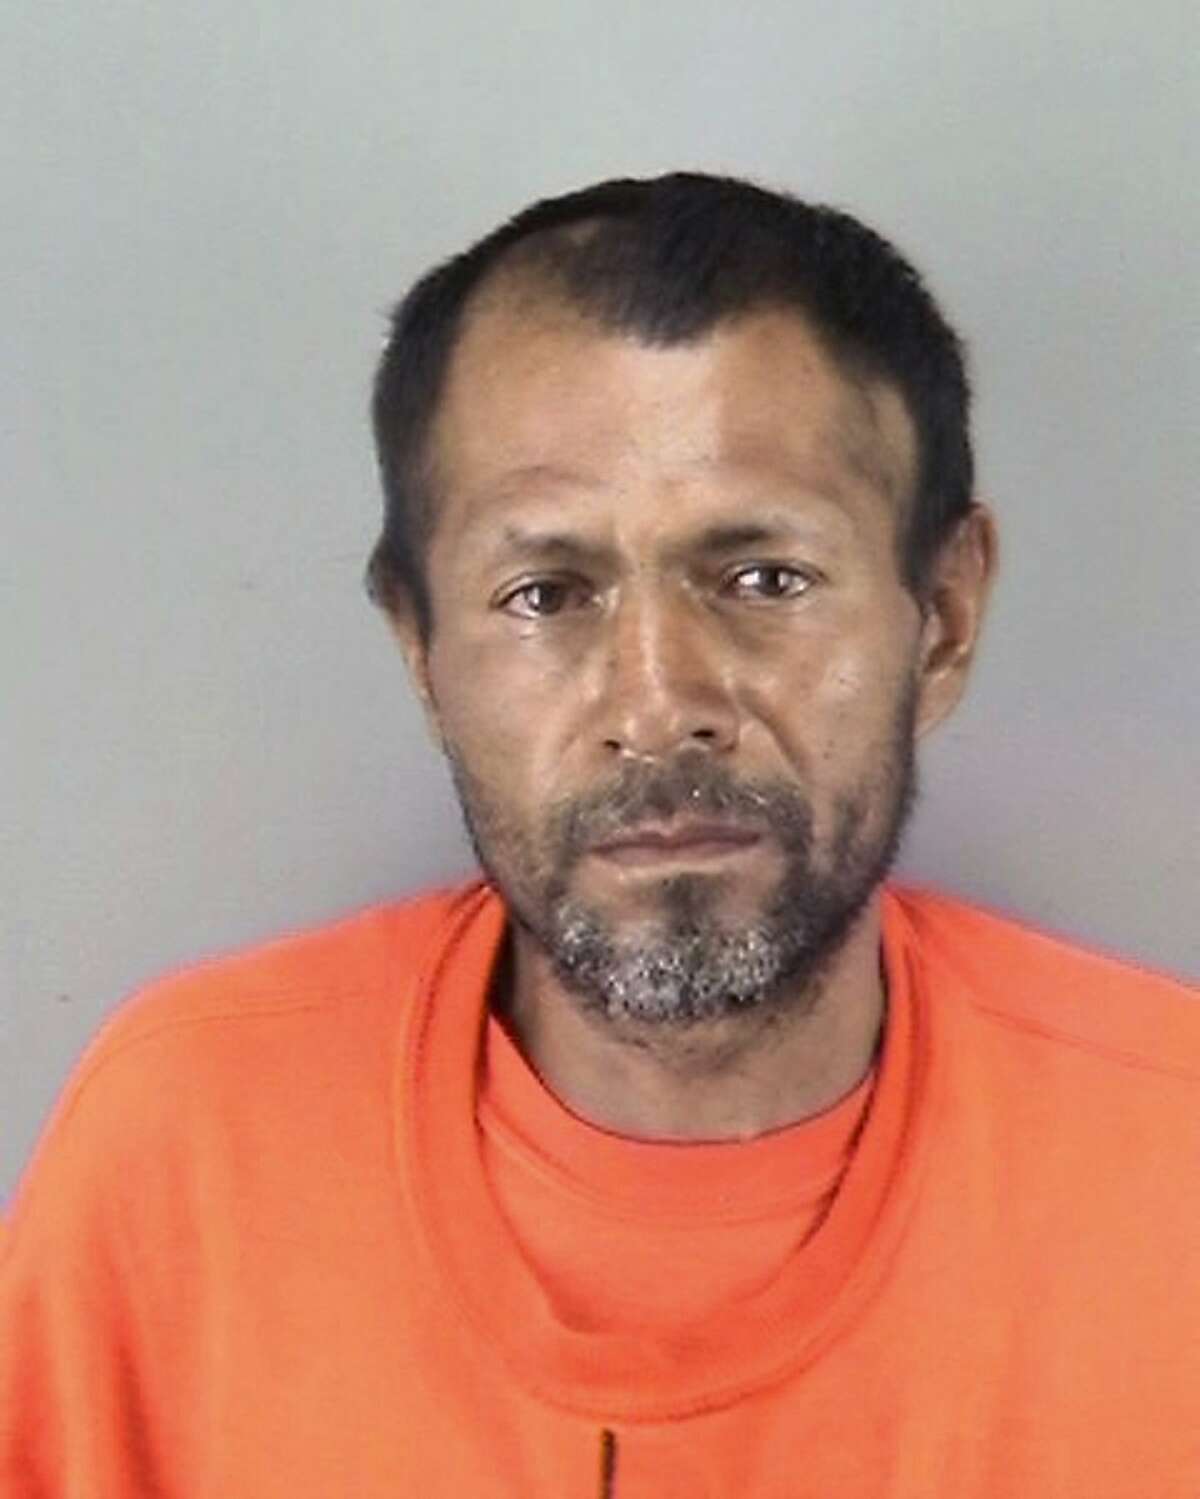 FILE - This undated file booking photo provided by the San Francisco Police Department shows Jose Ines Garcia Zarate. San Francisco jurors heard the muddled confession of the Mexican national on trial for the fatal shooting of Kate Steinle, whose death touched off a fierce debate over immigration. On Wednesday, Nov. 1, 2017, prosecutors played a portion of the interrogation of Jose Ines Garcia Zarate recorded several hours after Steinle was shot on July 1, 2015. (San Francisco Police Department via AP, File)